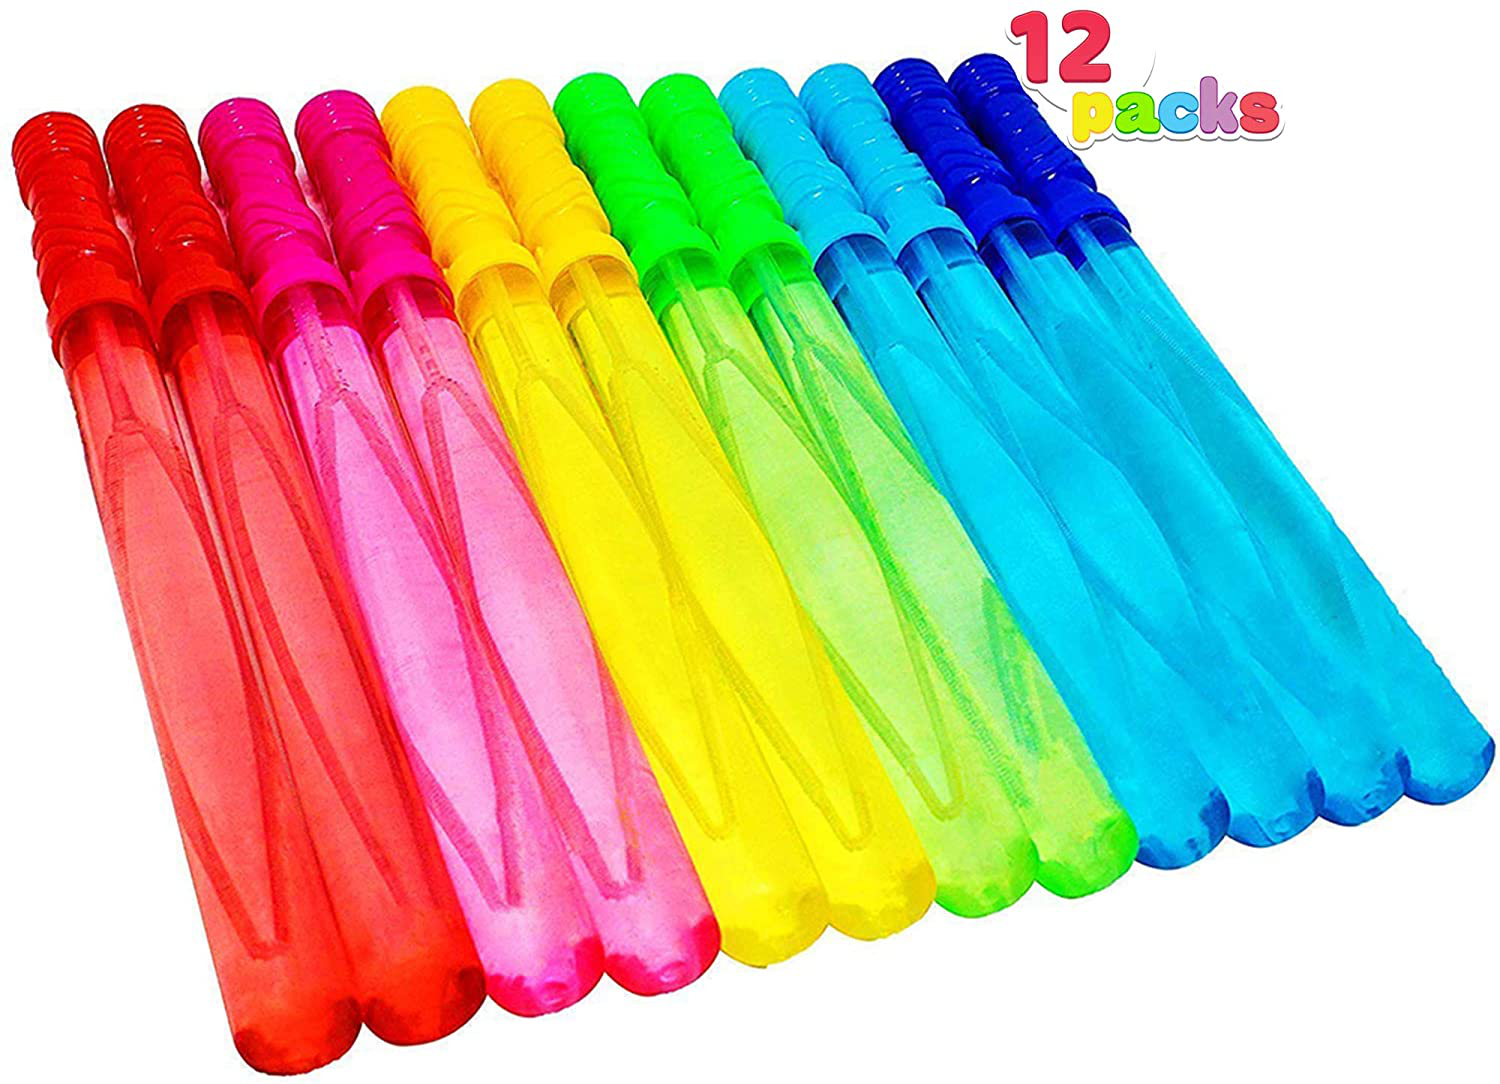 36 Count Fun Express Stackable Plastic Bear Pencils - 3 Packs of 12 